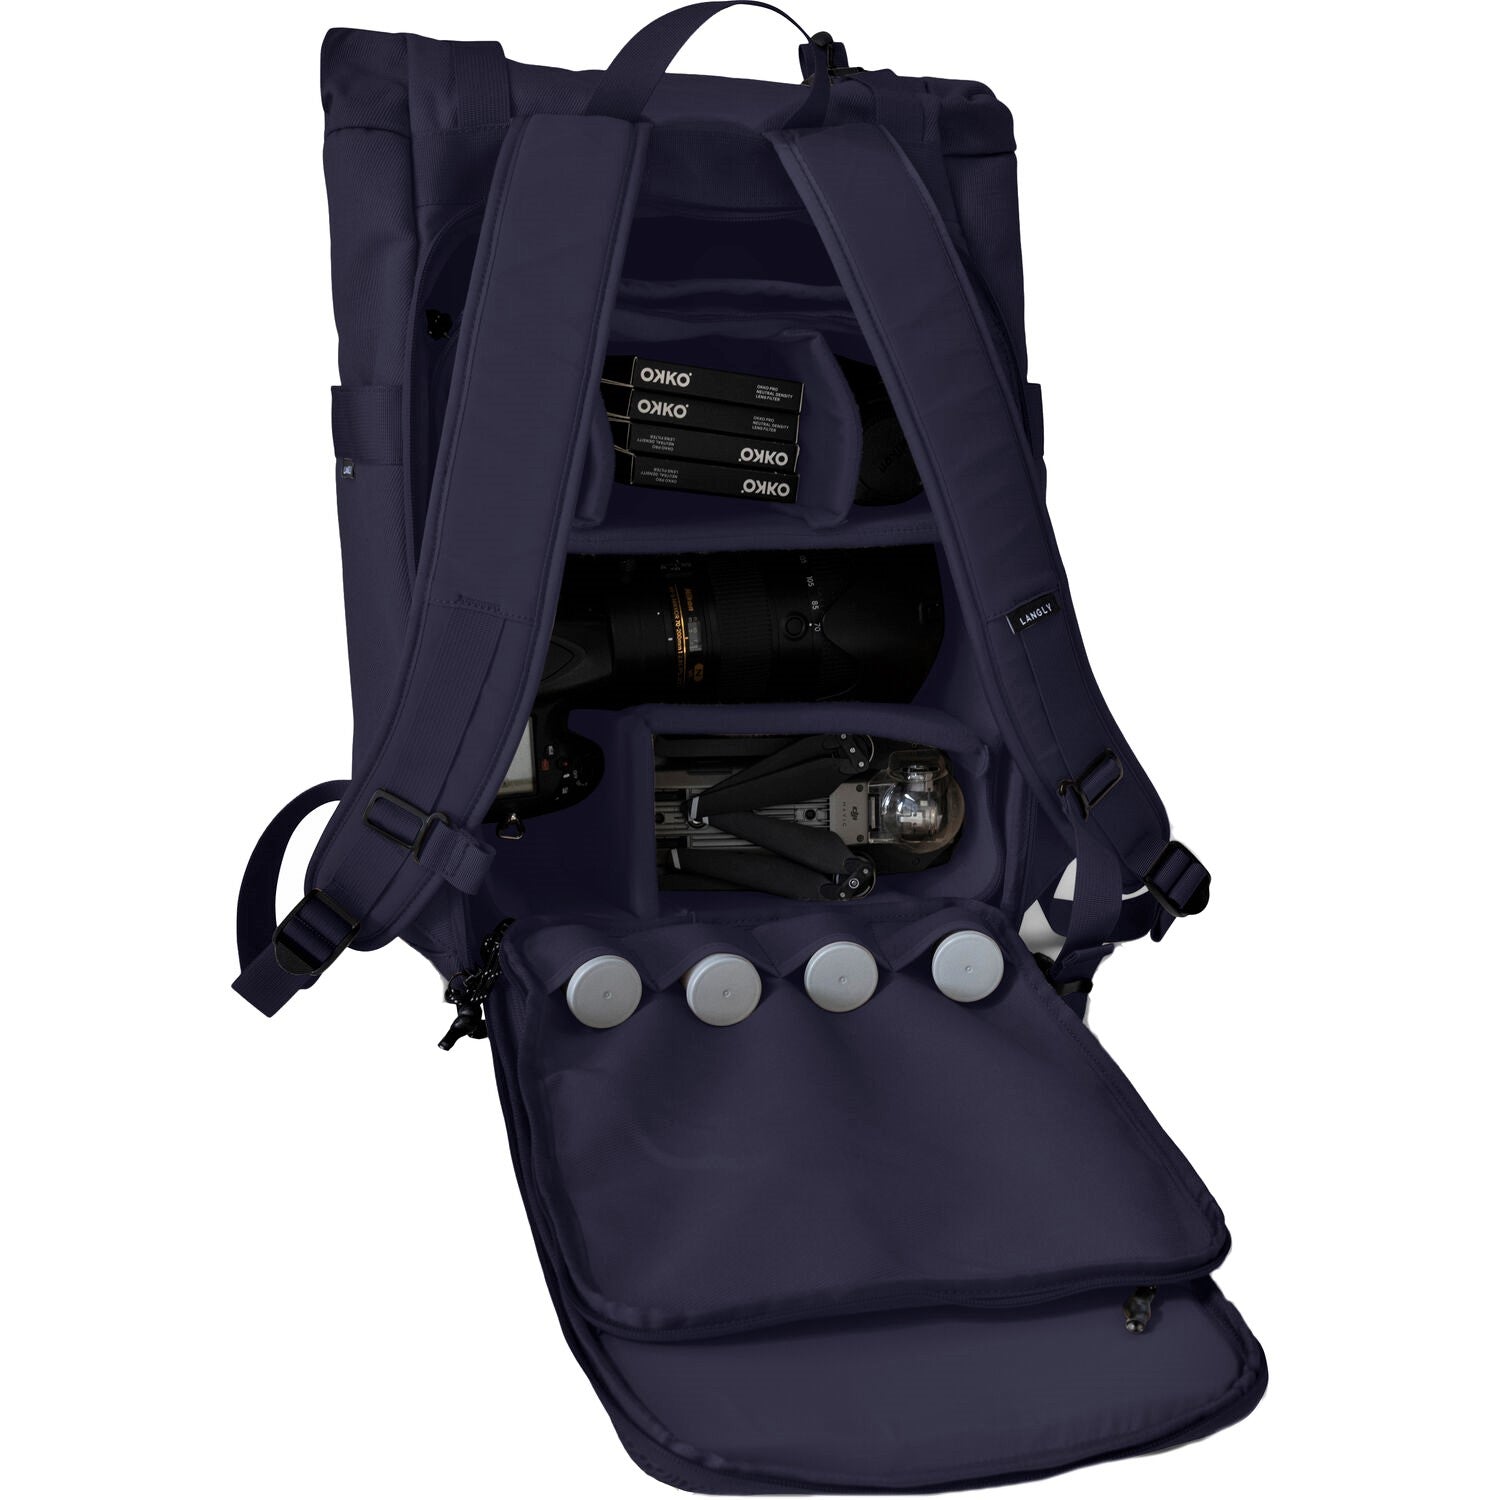 Langly Weekender Backpack with Camera Cube (Navy)